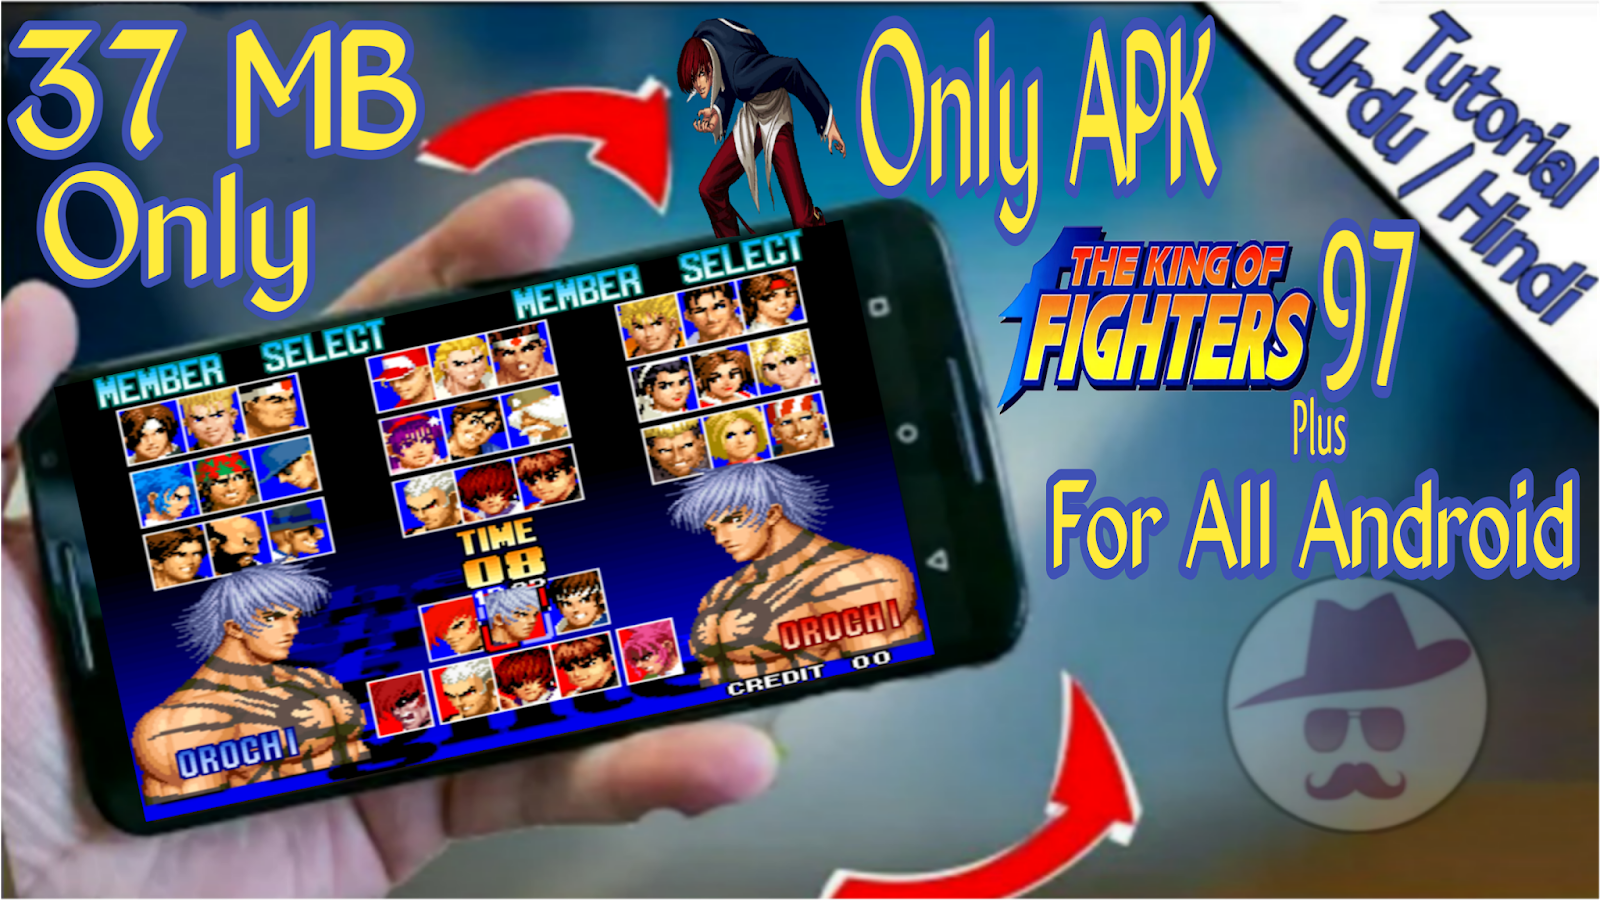 king of fighters 97 plus hack download free